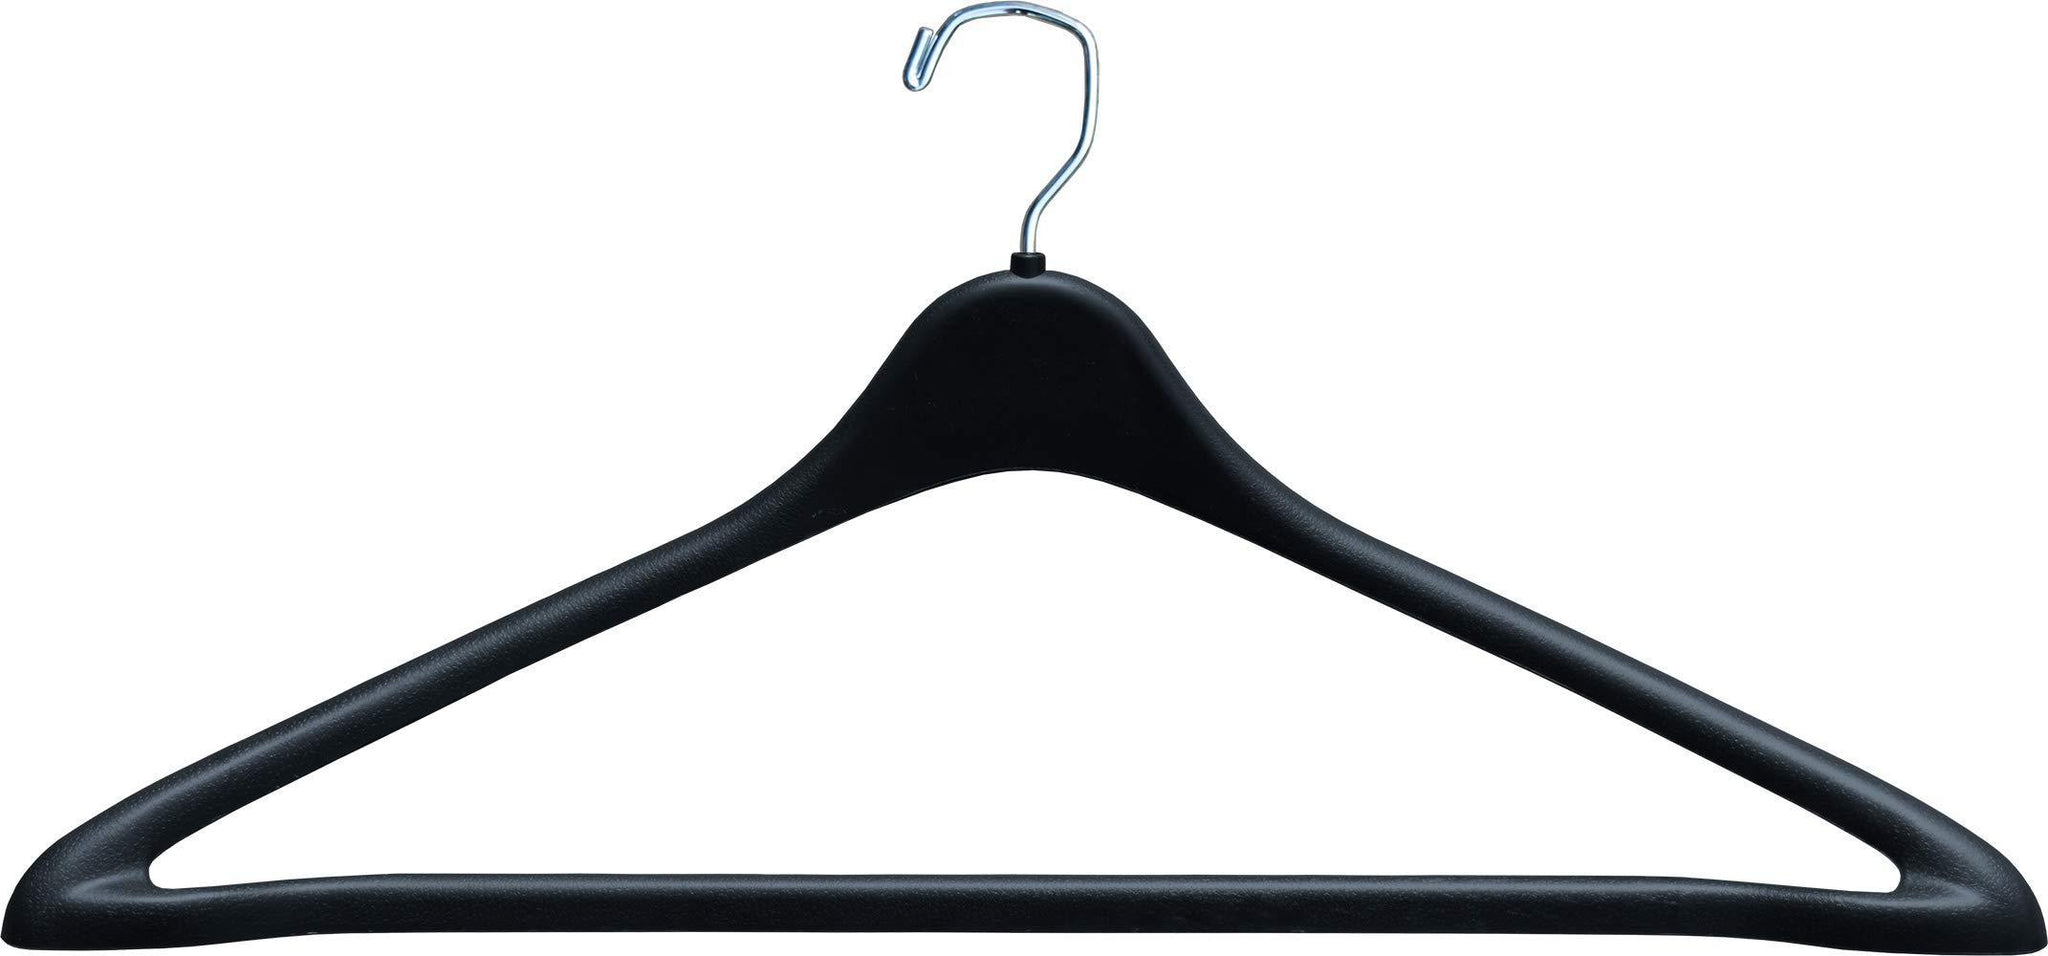 Save the great american hanger company heavy duty black plastic suit hanger with fixed bar box of 100 sturdy 1 2 inch thick coat hangers with square topped chrome swivel hook